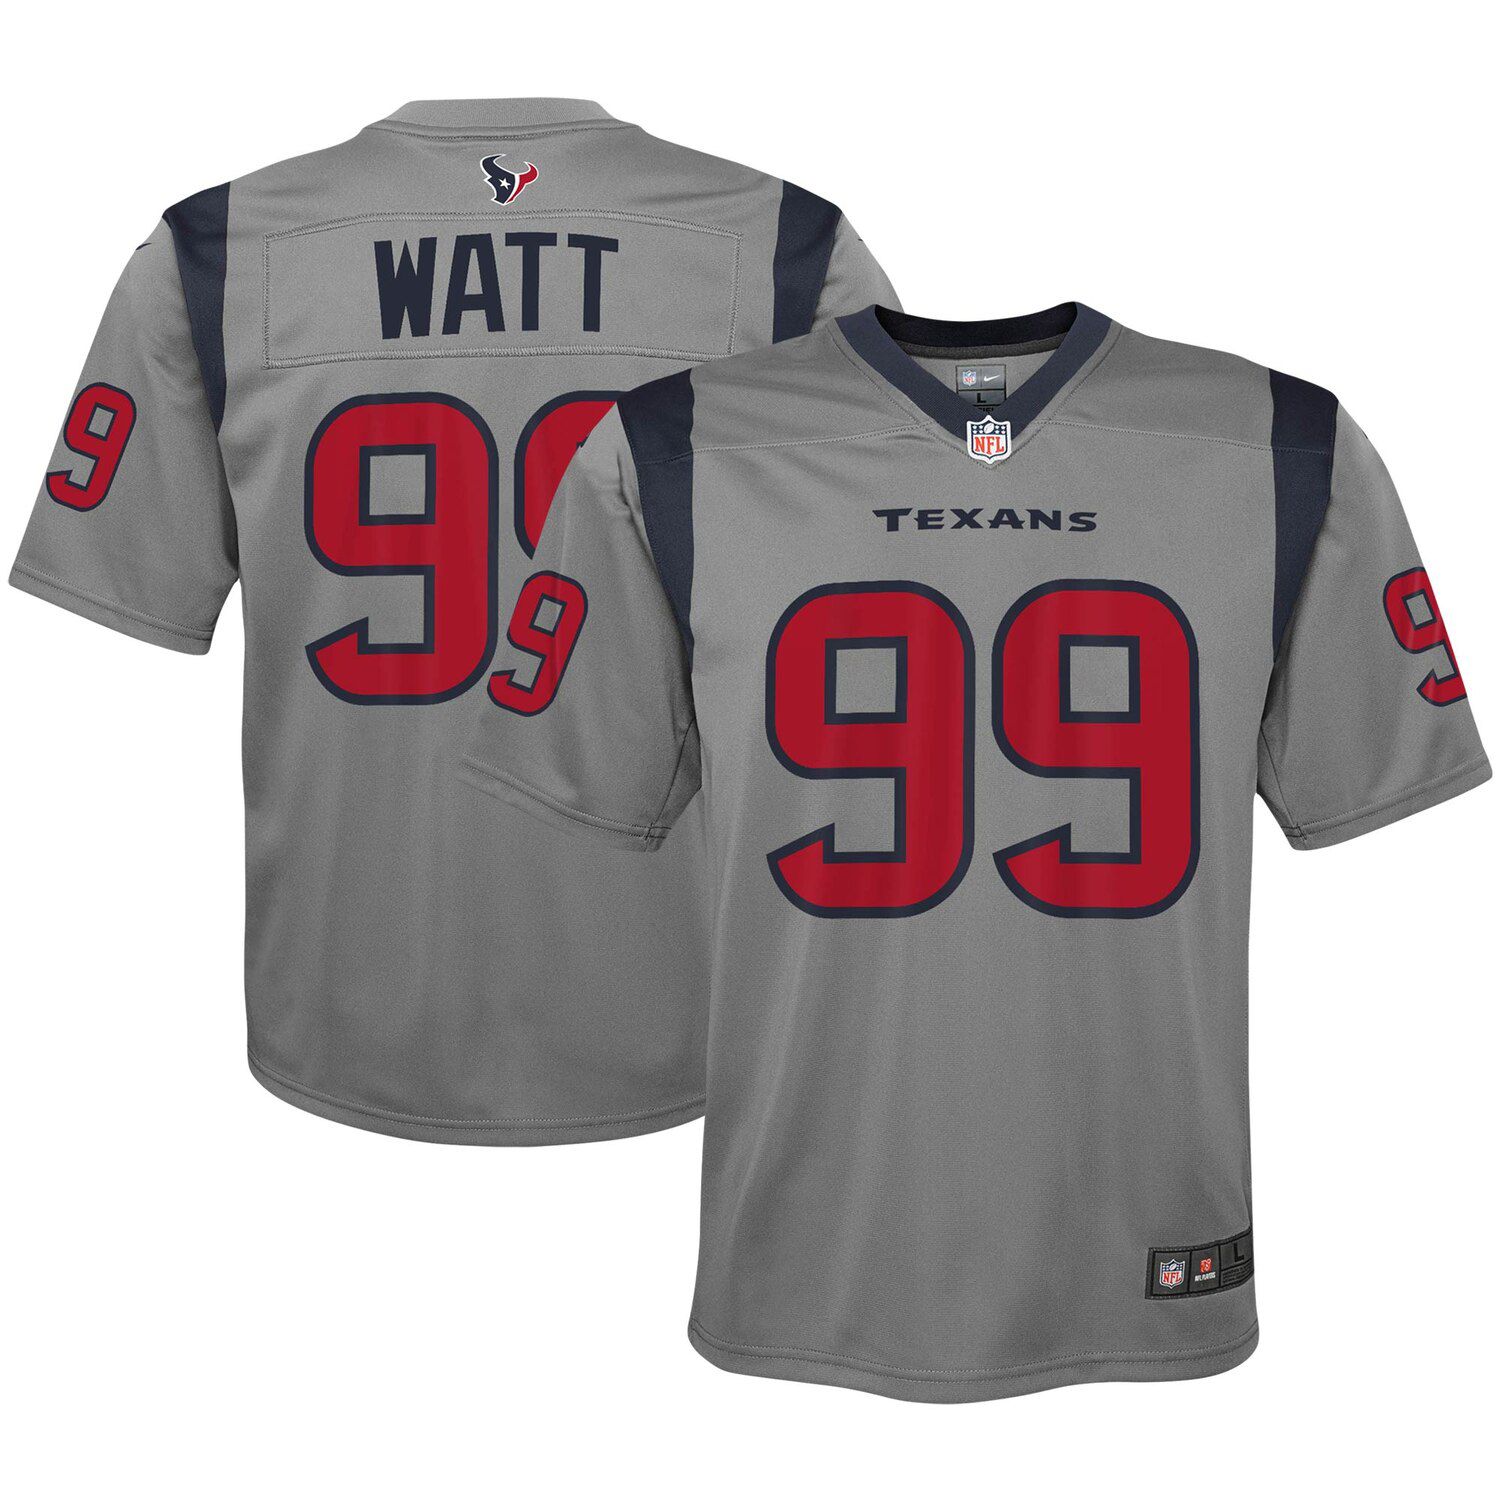 texans youth jersey